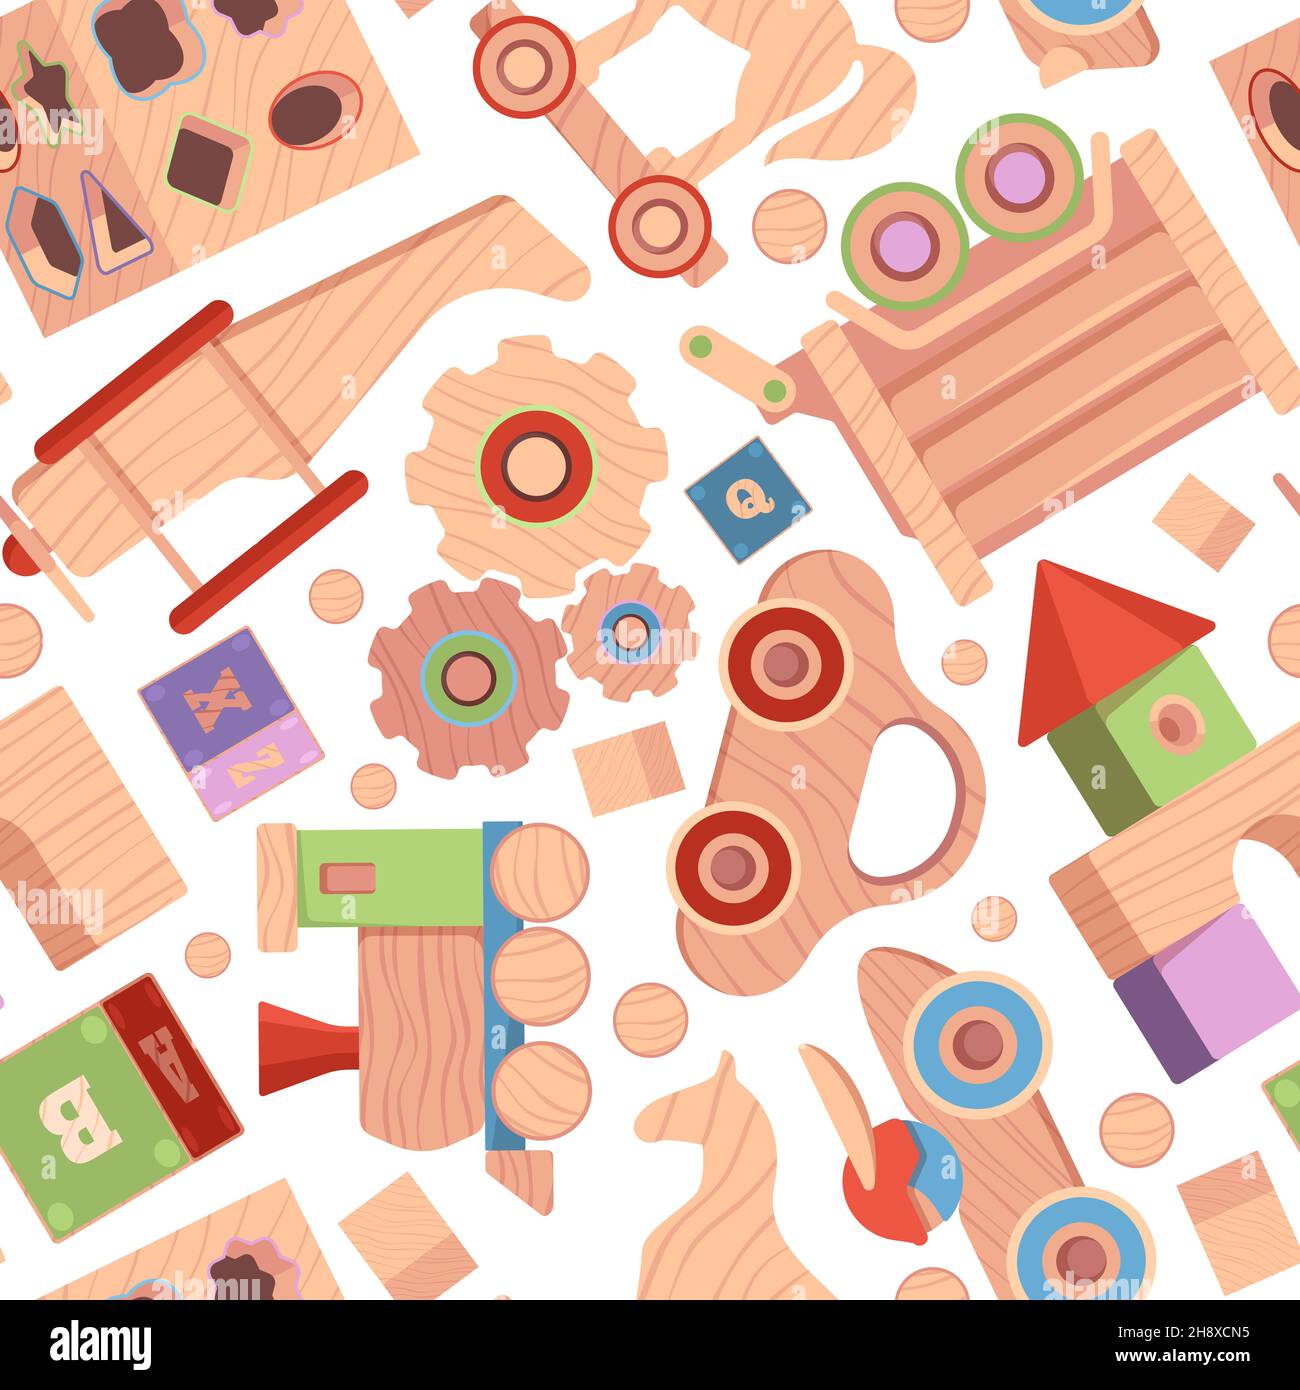 Toys pattern. Vintage wooden attractions for kids textile design projects templates with funny toys blocks cars soldiers dolls garish vector seamless Stock Vector